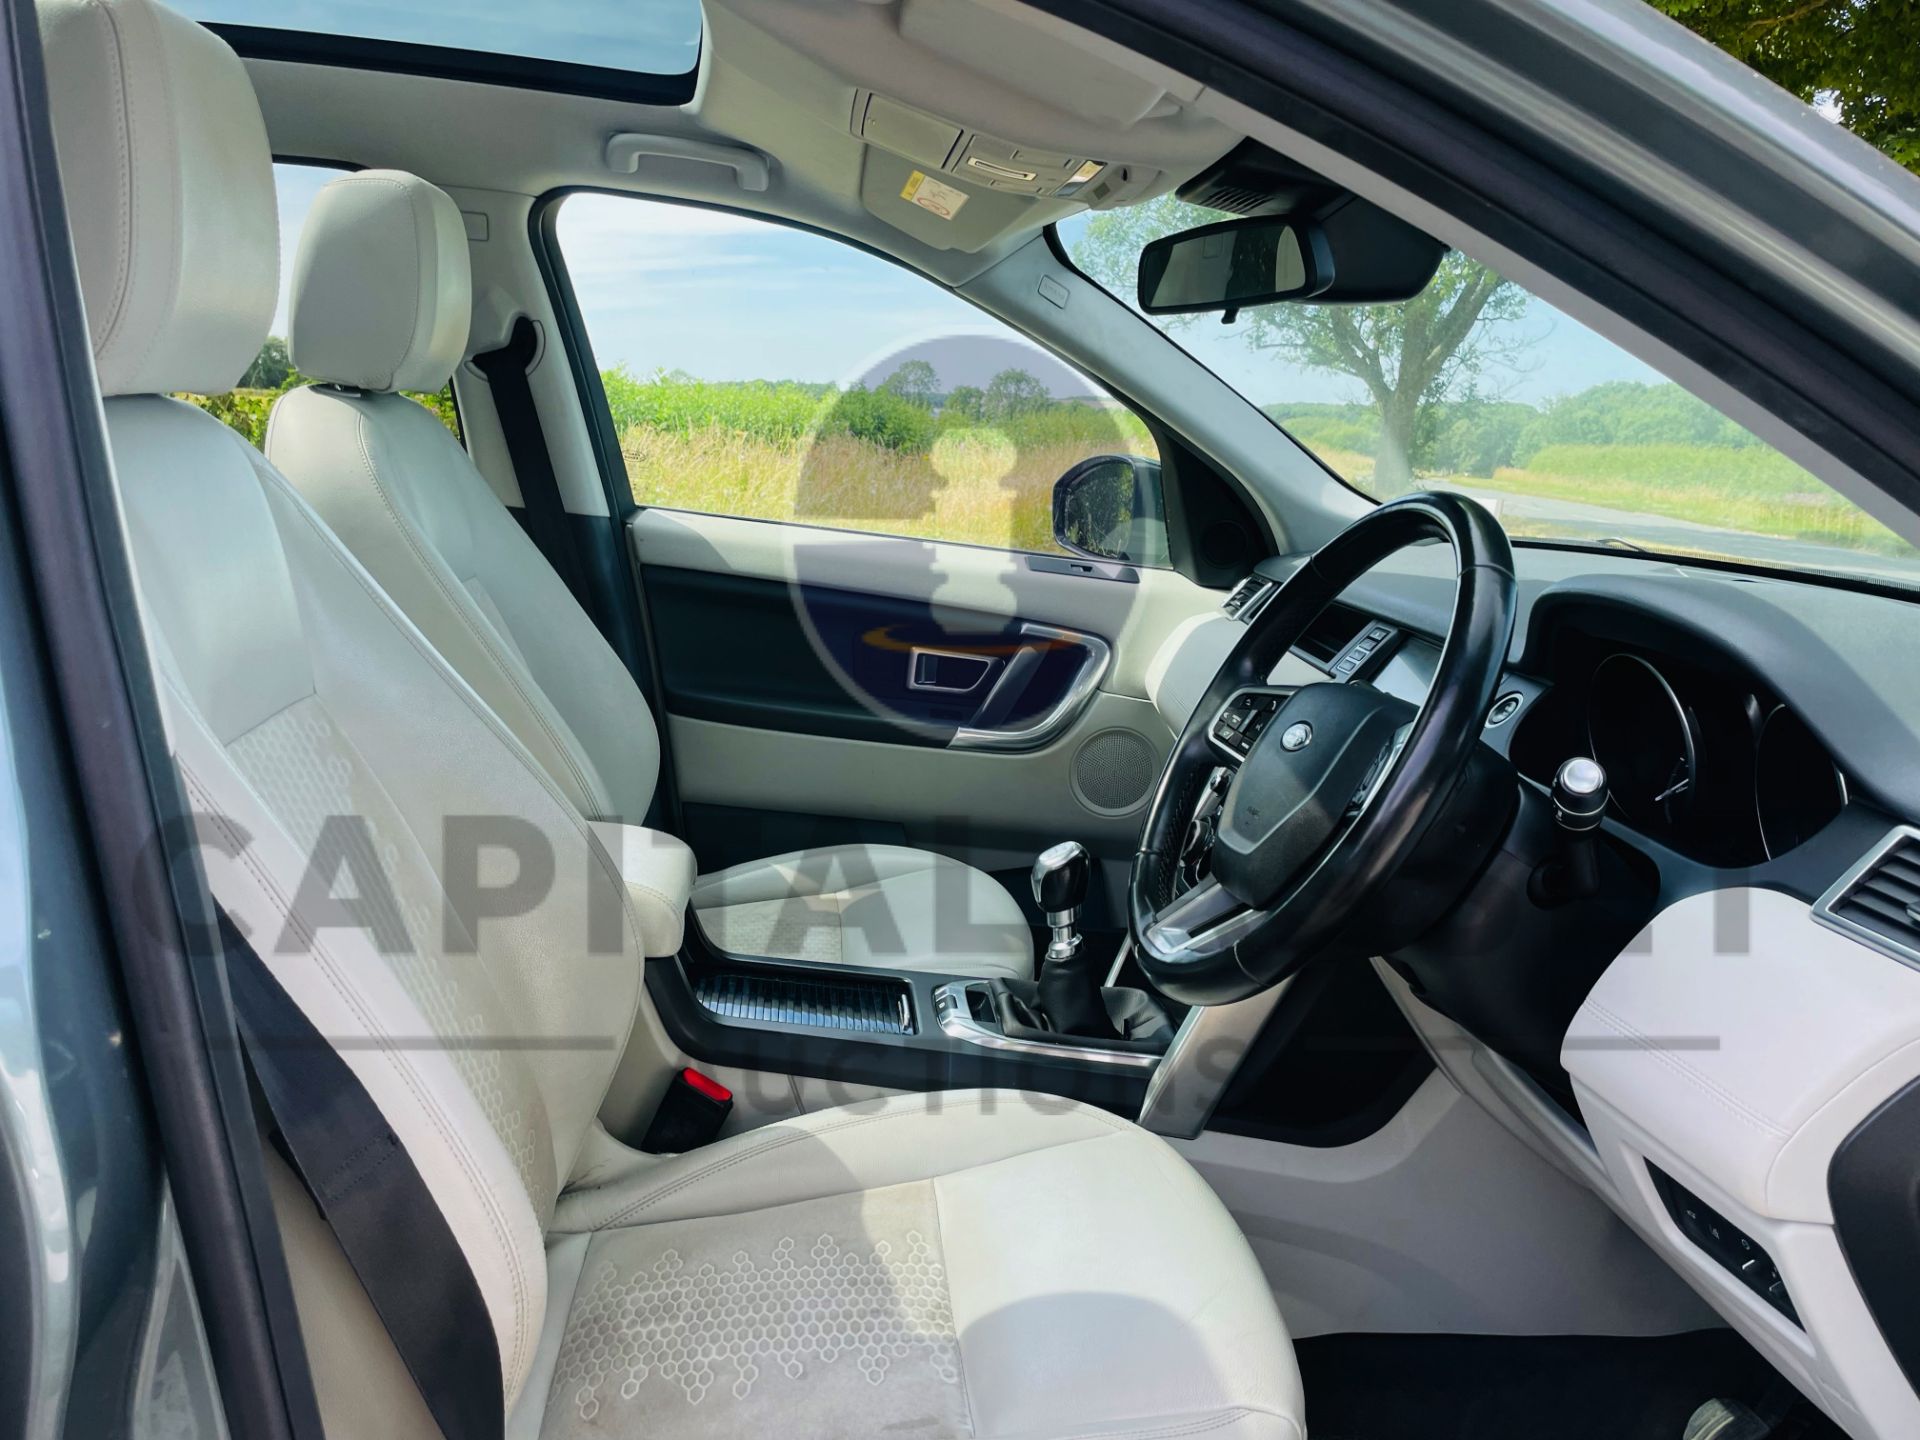 (On Sale) LAND ROVER DISCOVERY SPORT *SE TECH* SUV (2019 - EURO 6) 2.0 ED4 - STOP/START *HUGE SPEC* - Image 37 of 55